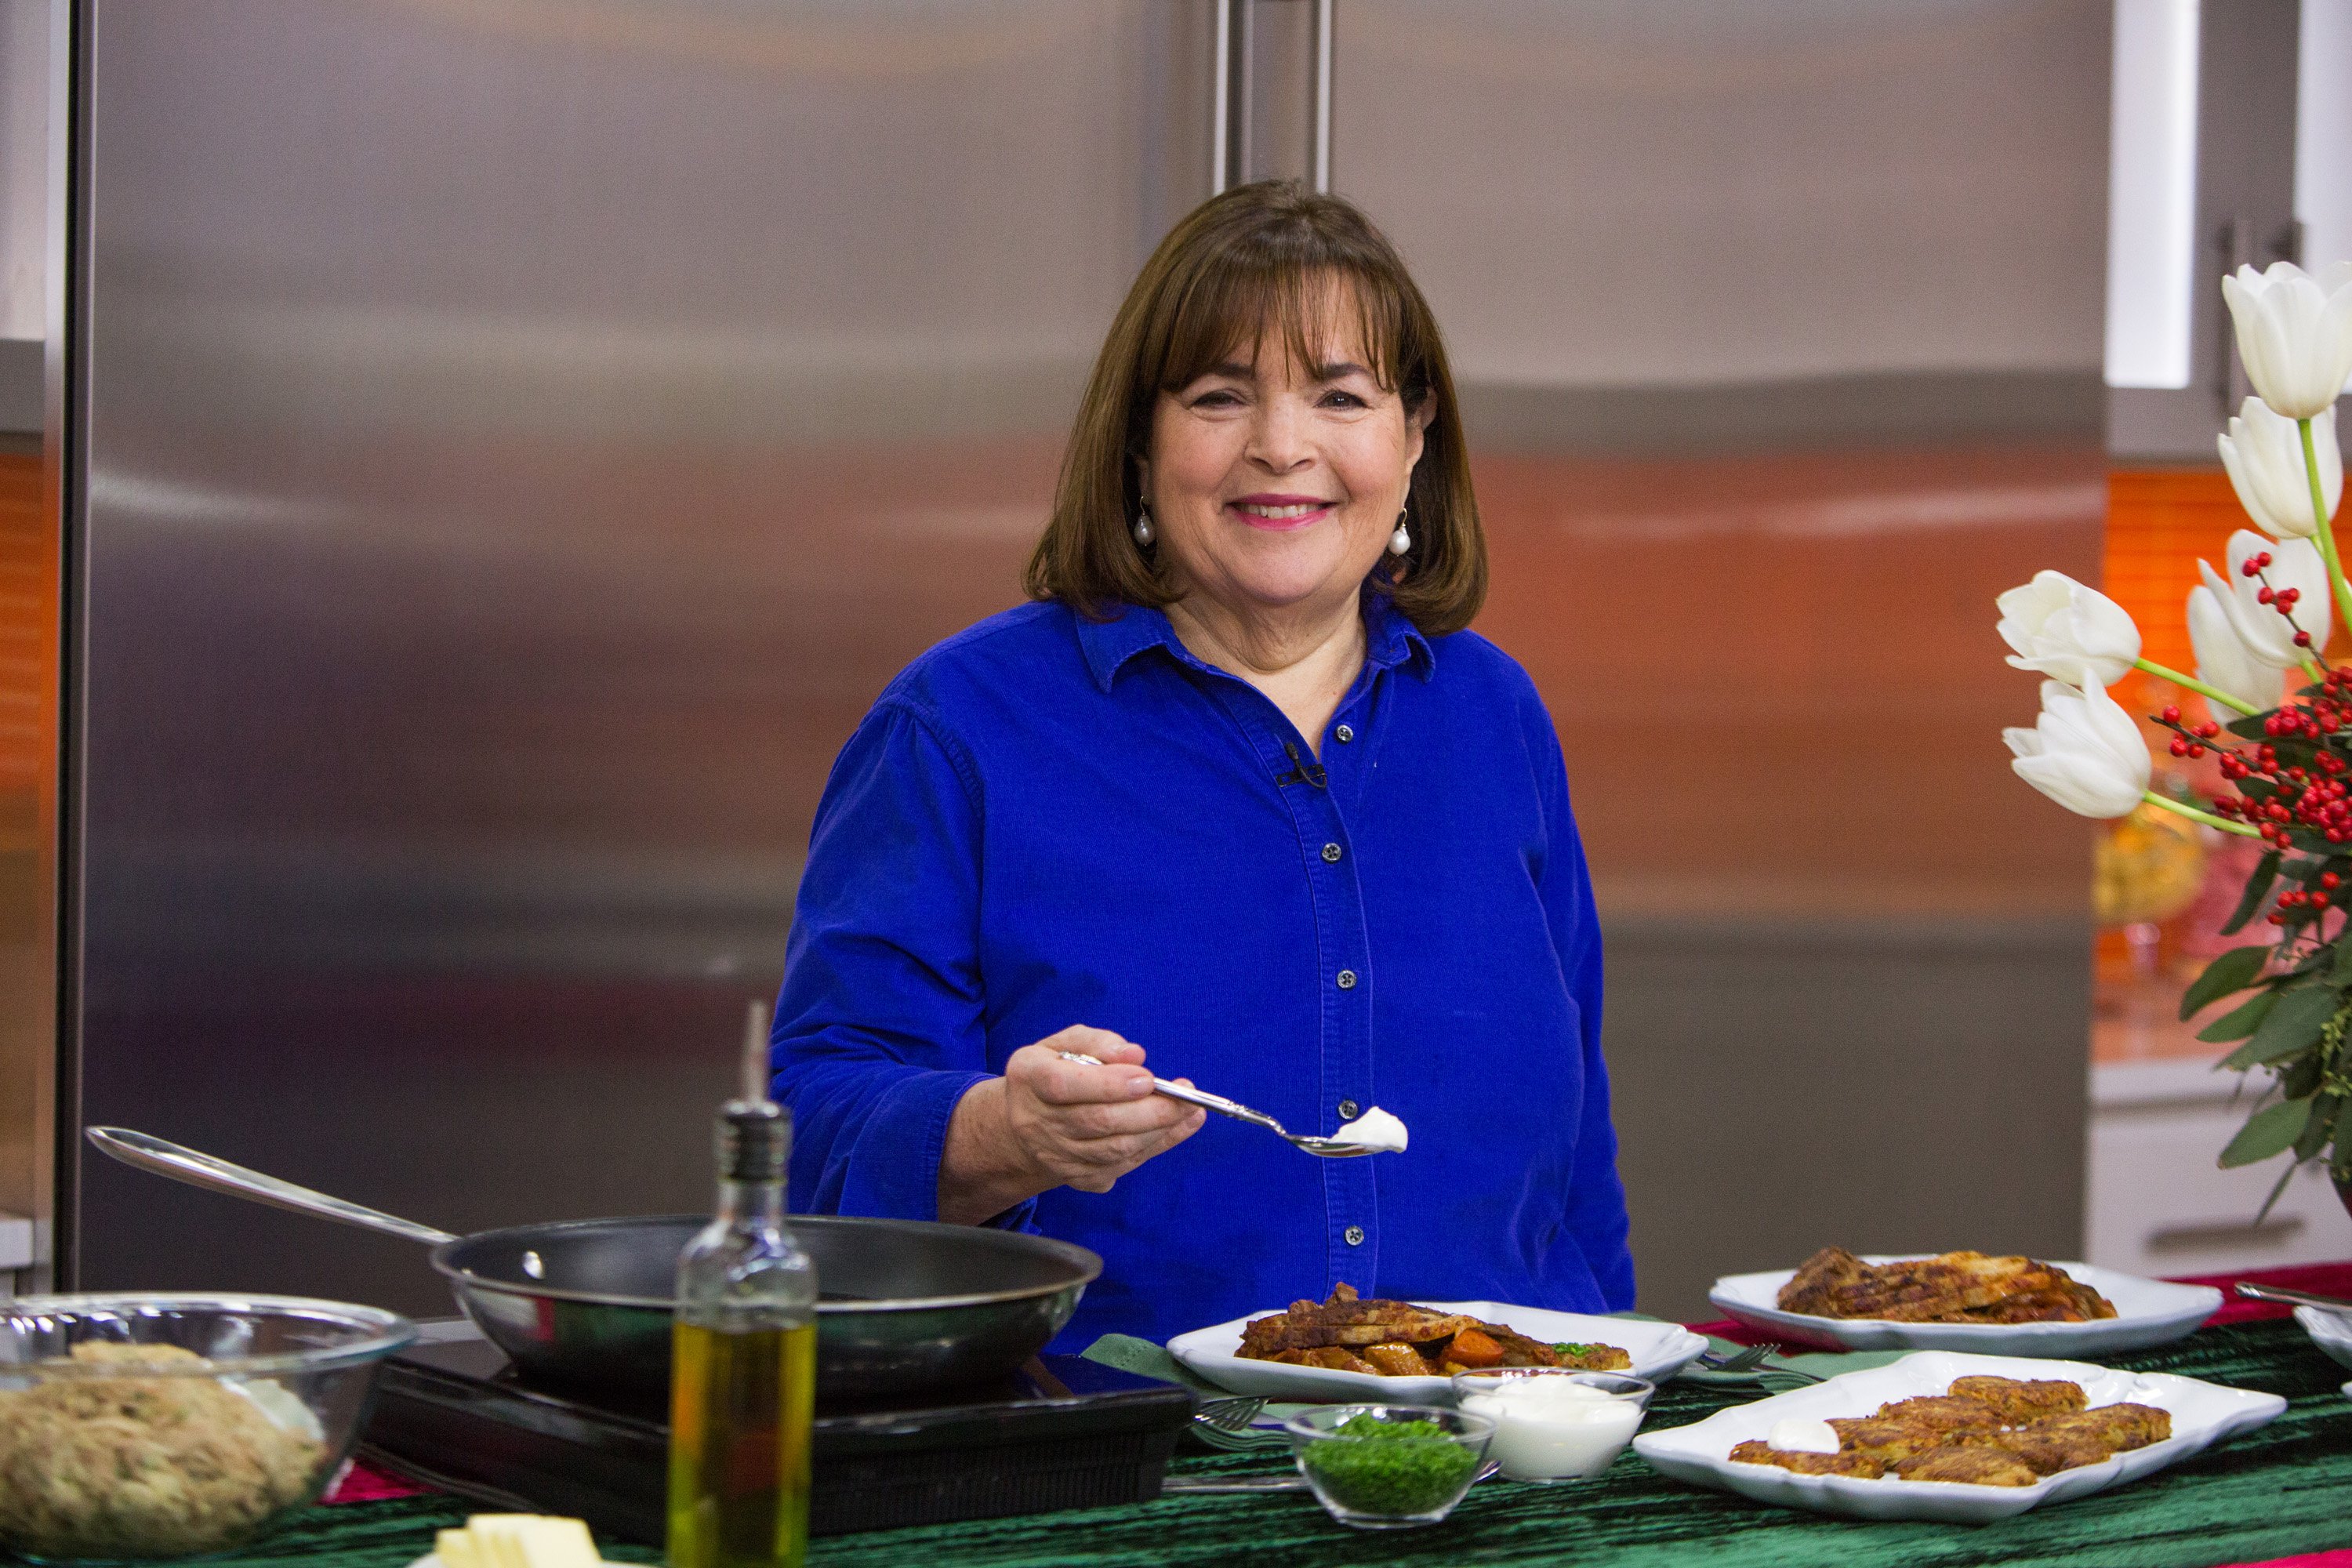 Ina Garten on "Today" in 2017. | Source: Getty Images